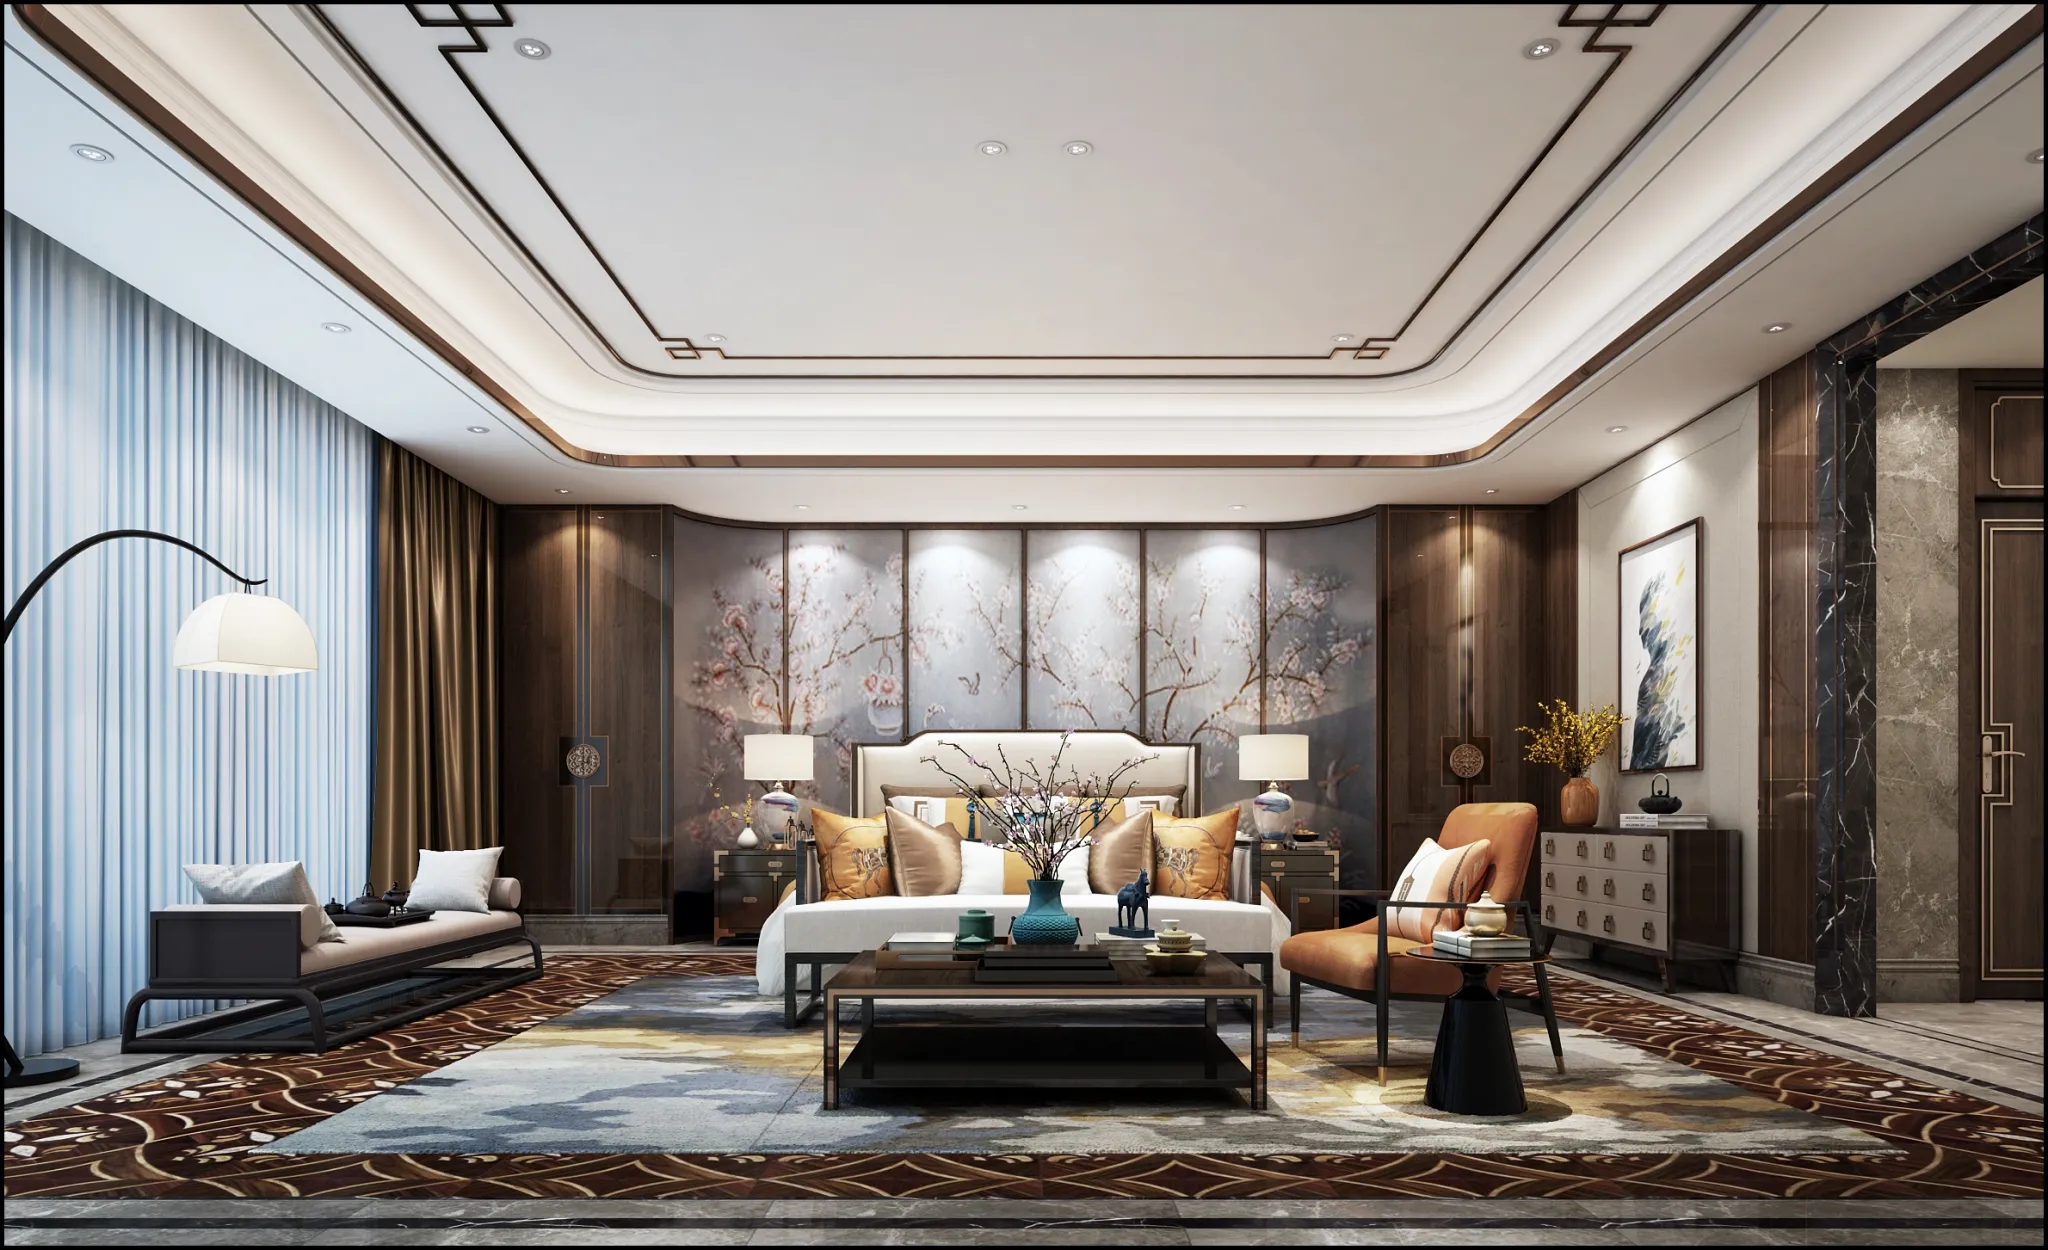 DESMOD INTERIOR 2021 (VRAY) – 4. LIVING ROOM – CHINESE – 027